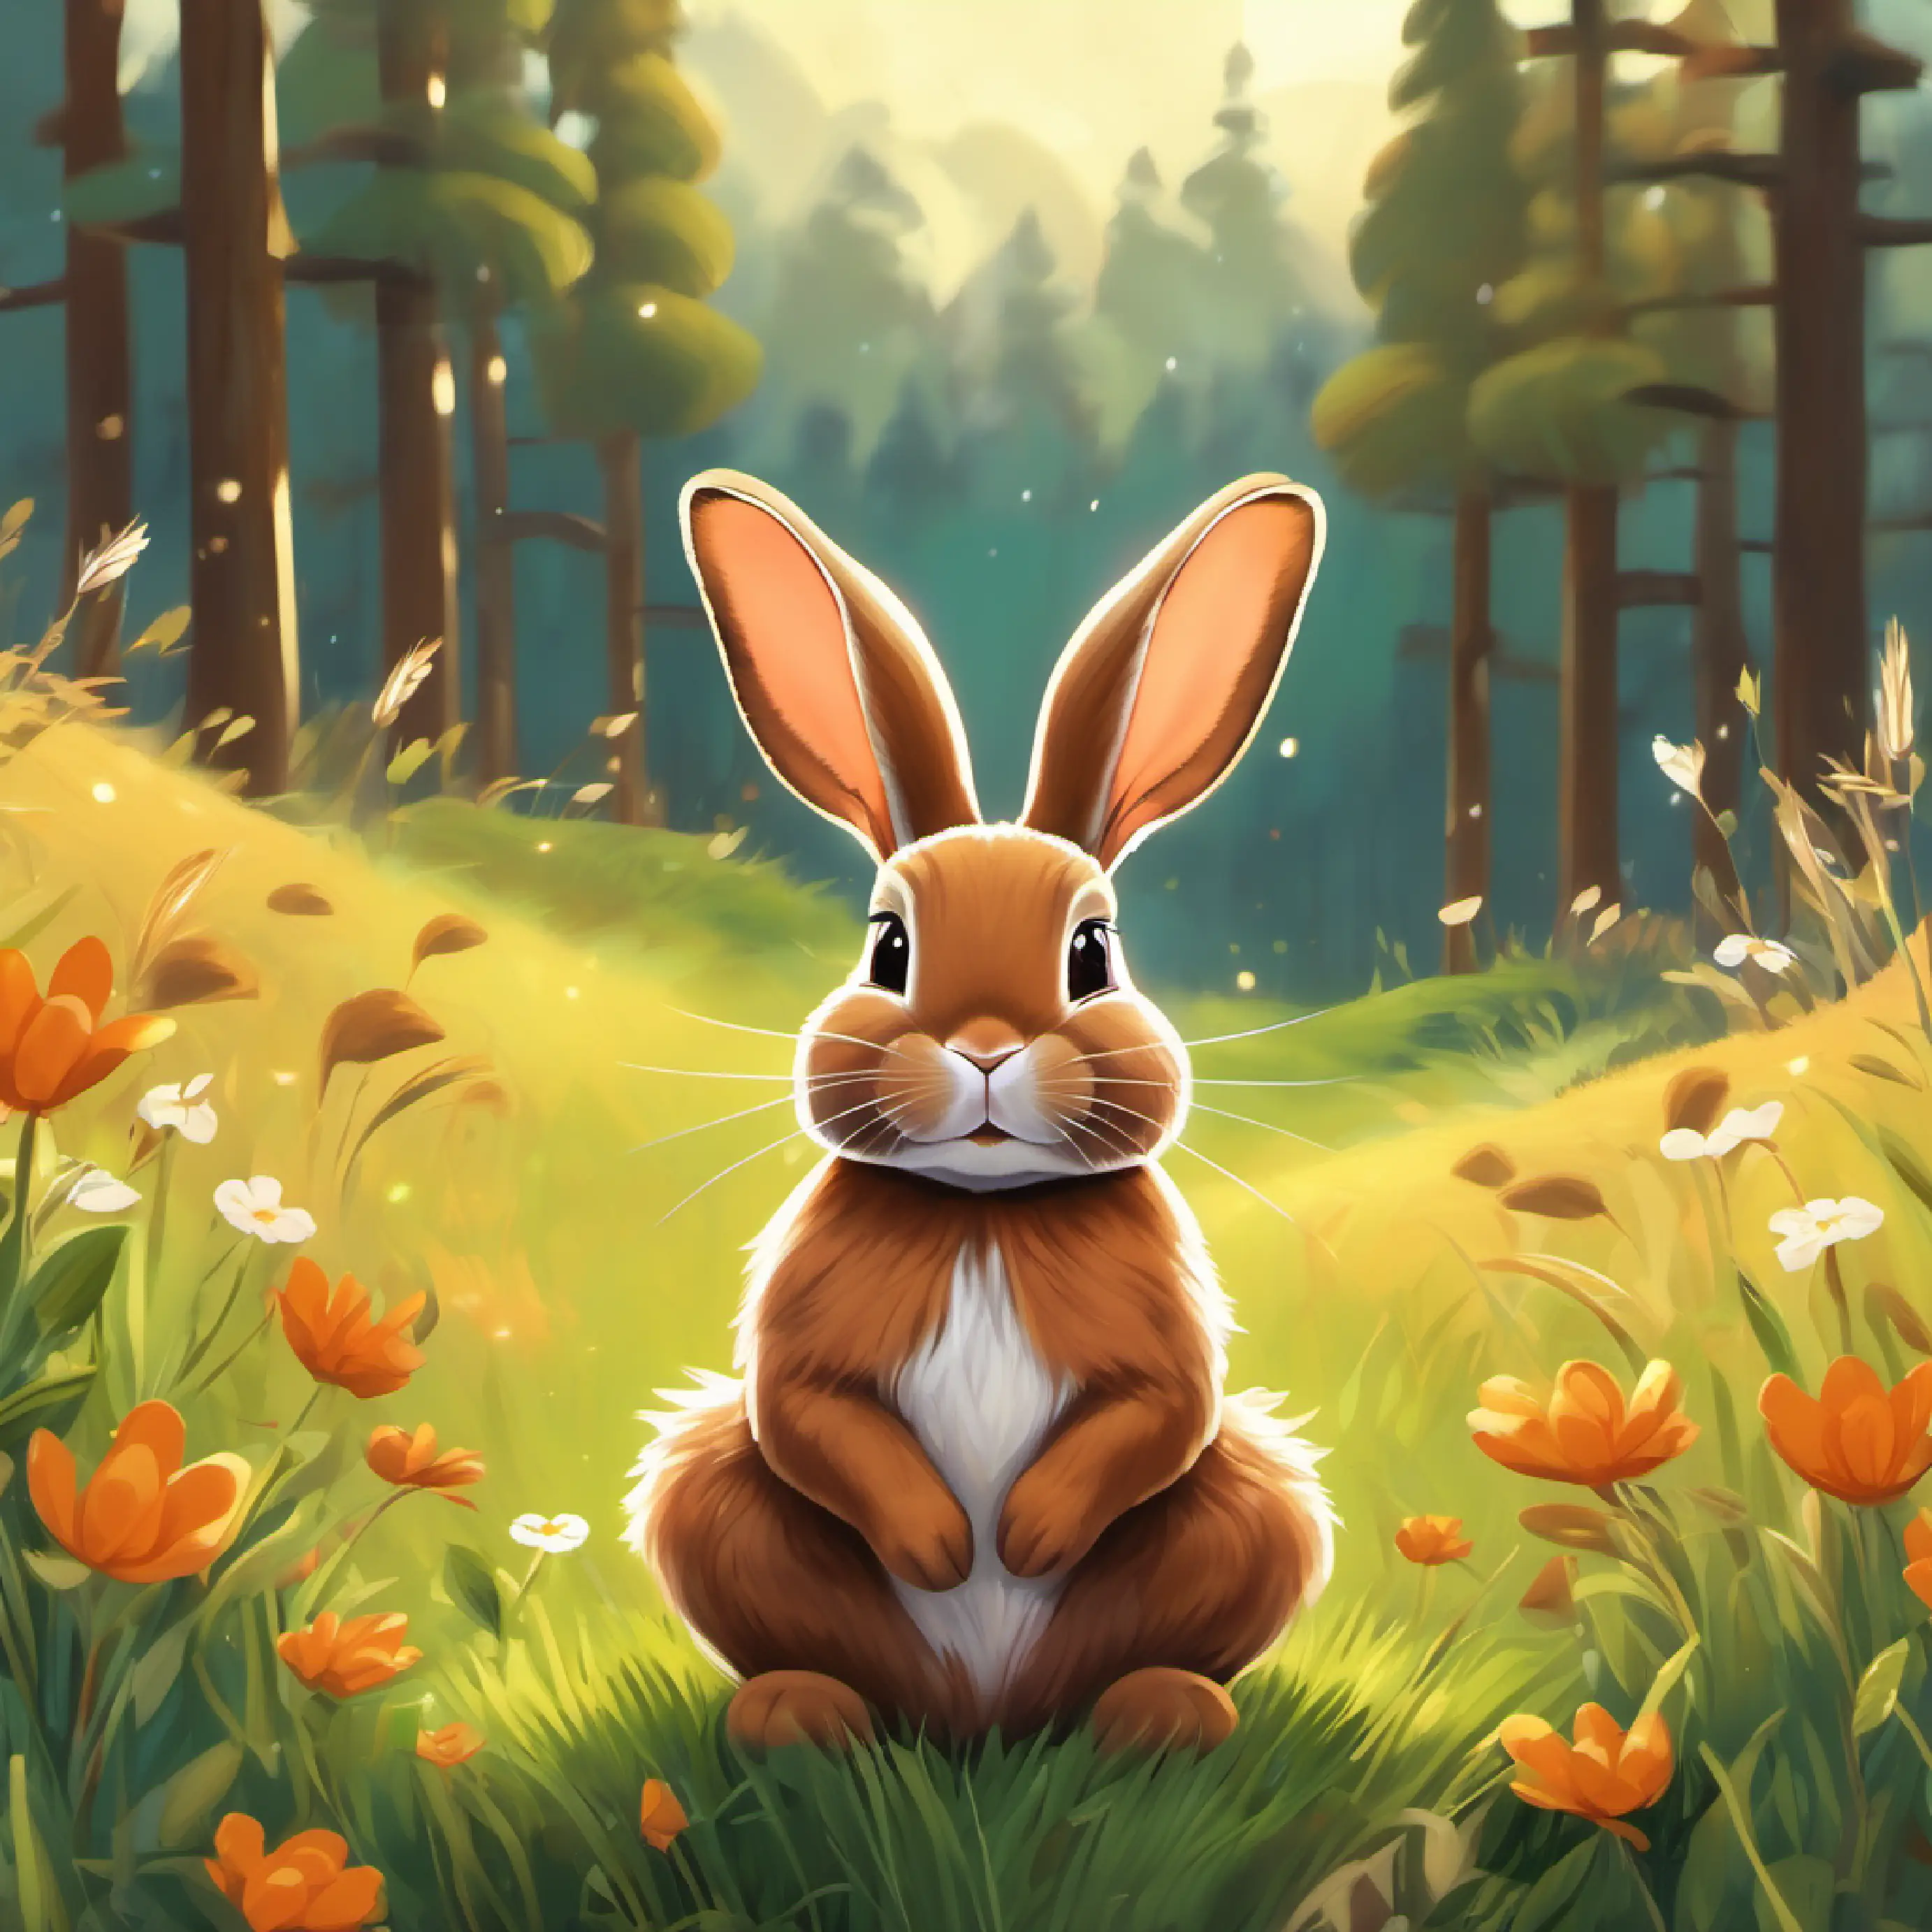 Introduces A brown rabbit with white paws closing its eyes meditating in the meadow